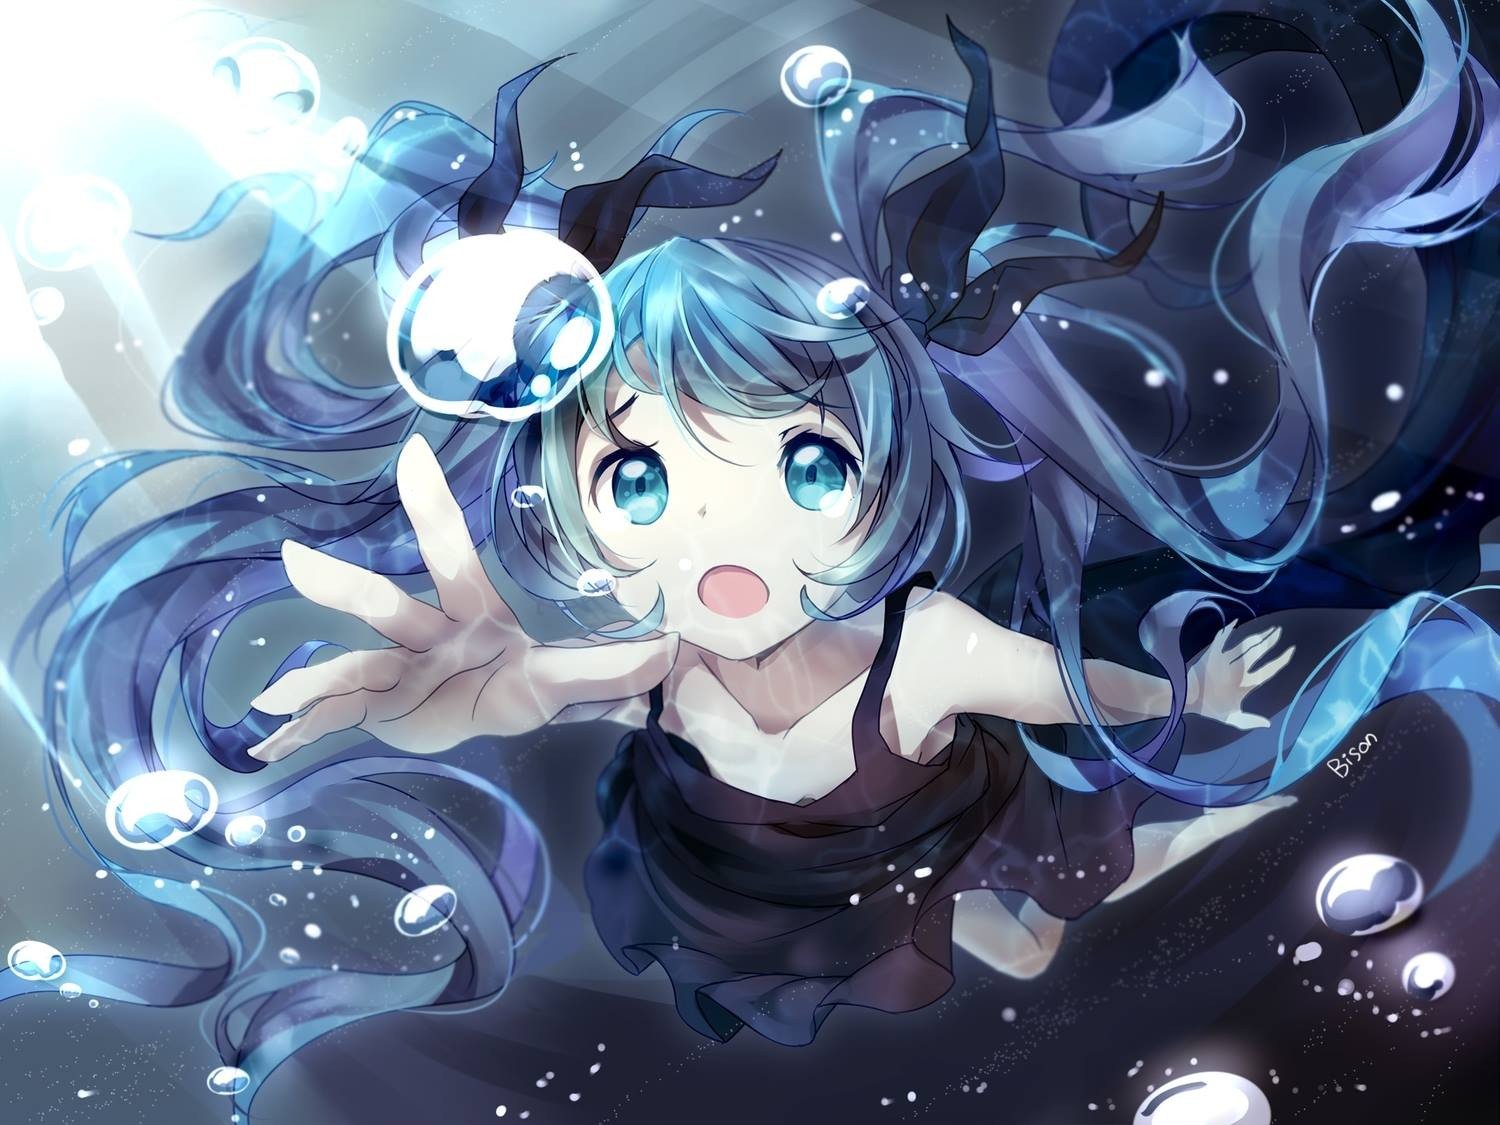 Image Twintails Anime Anime Girls Blue Hair Vocaloid Hatsune